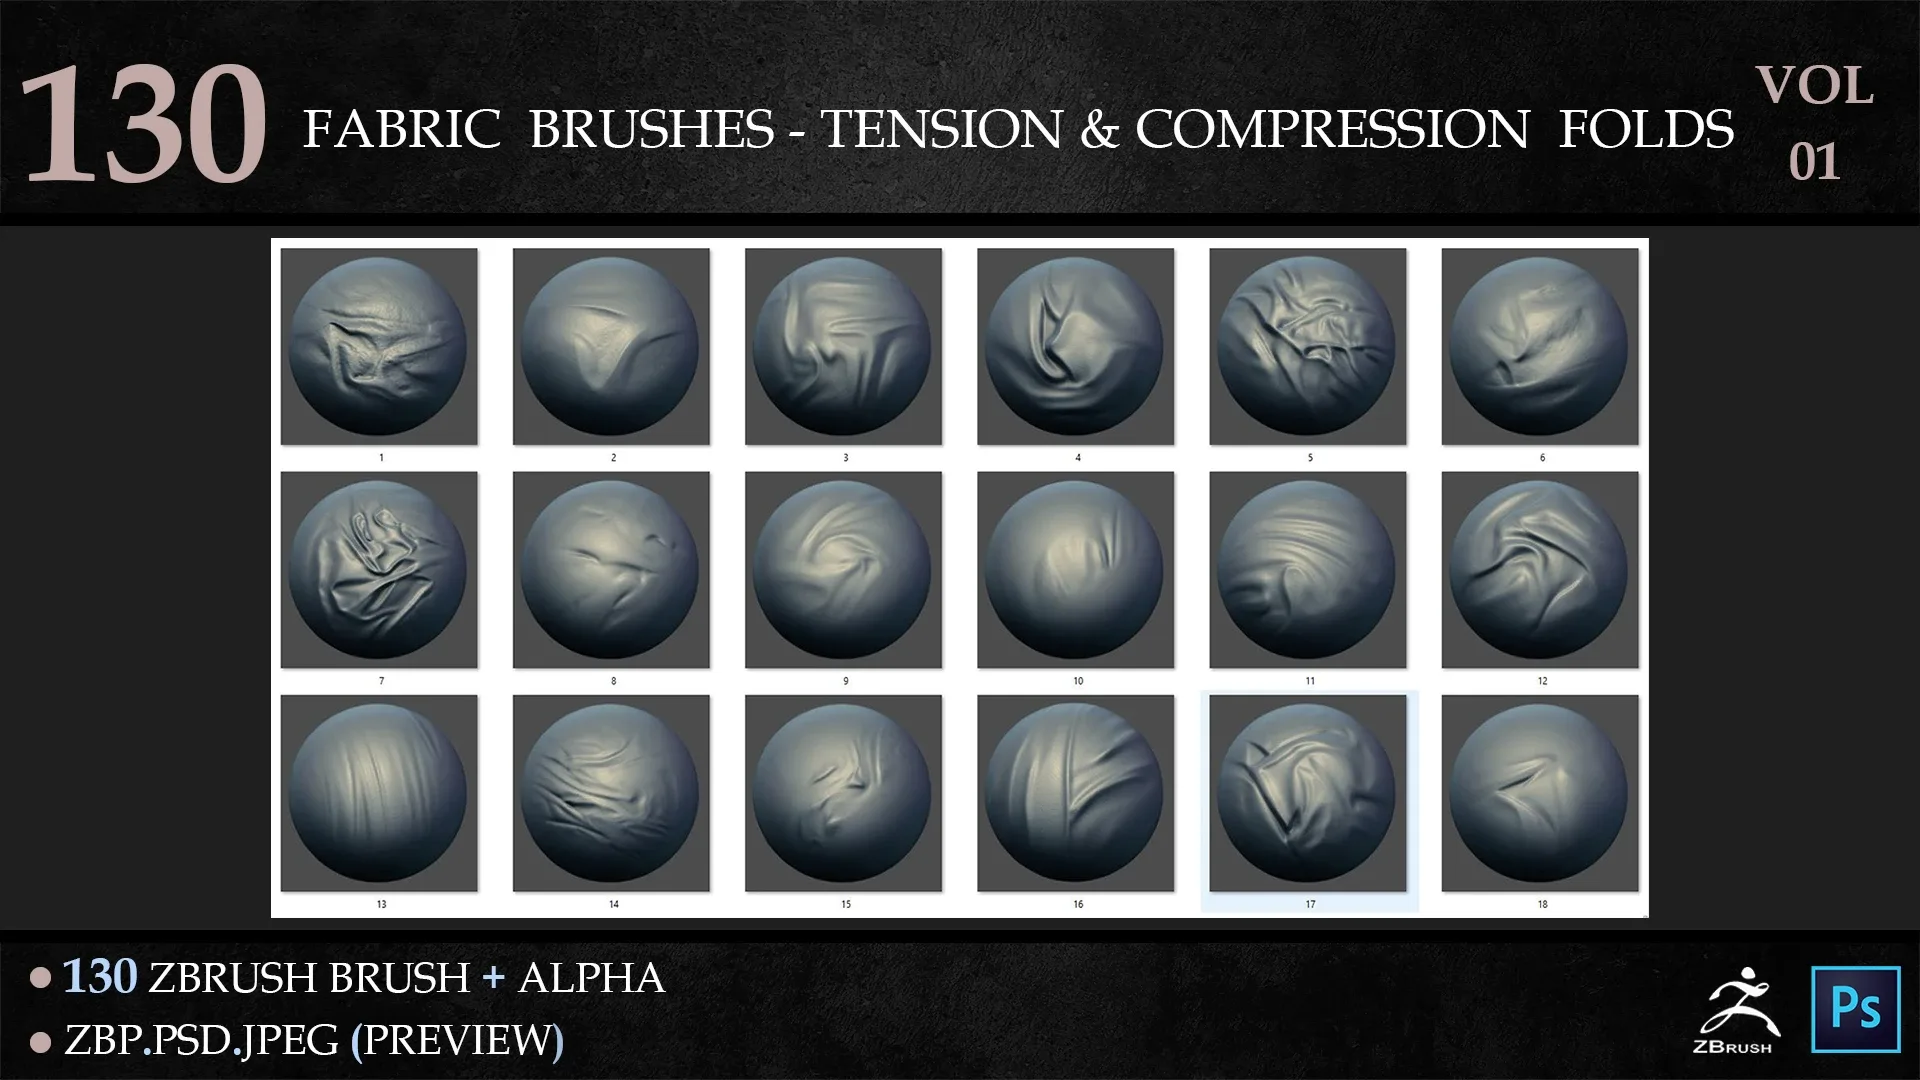 130 Fabric Brushes - Tension & Compression Folds